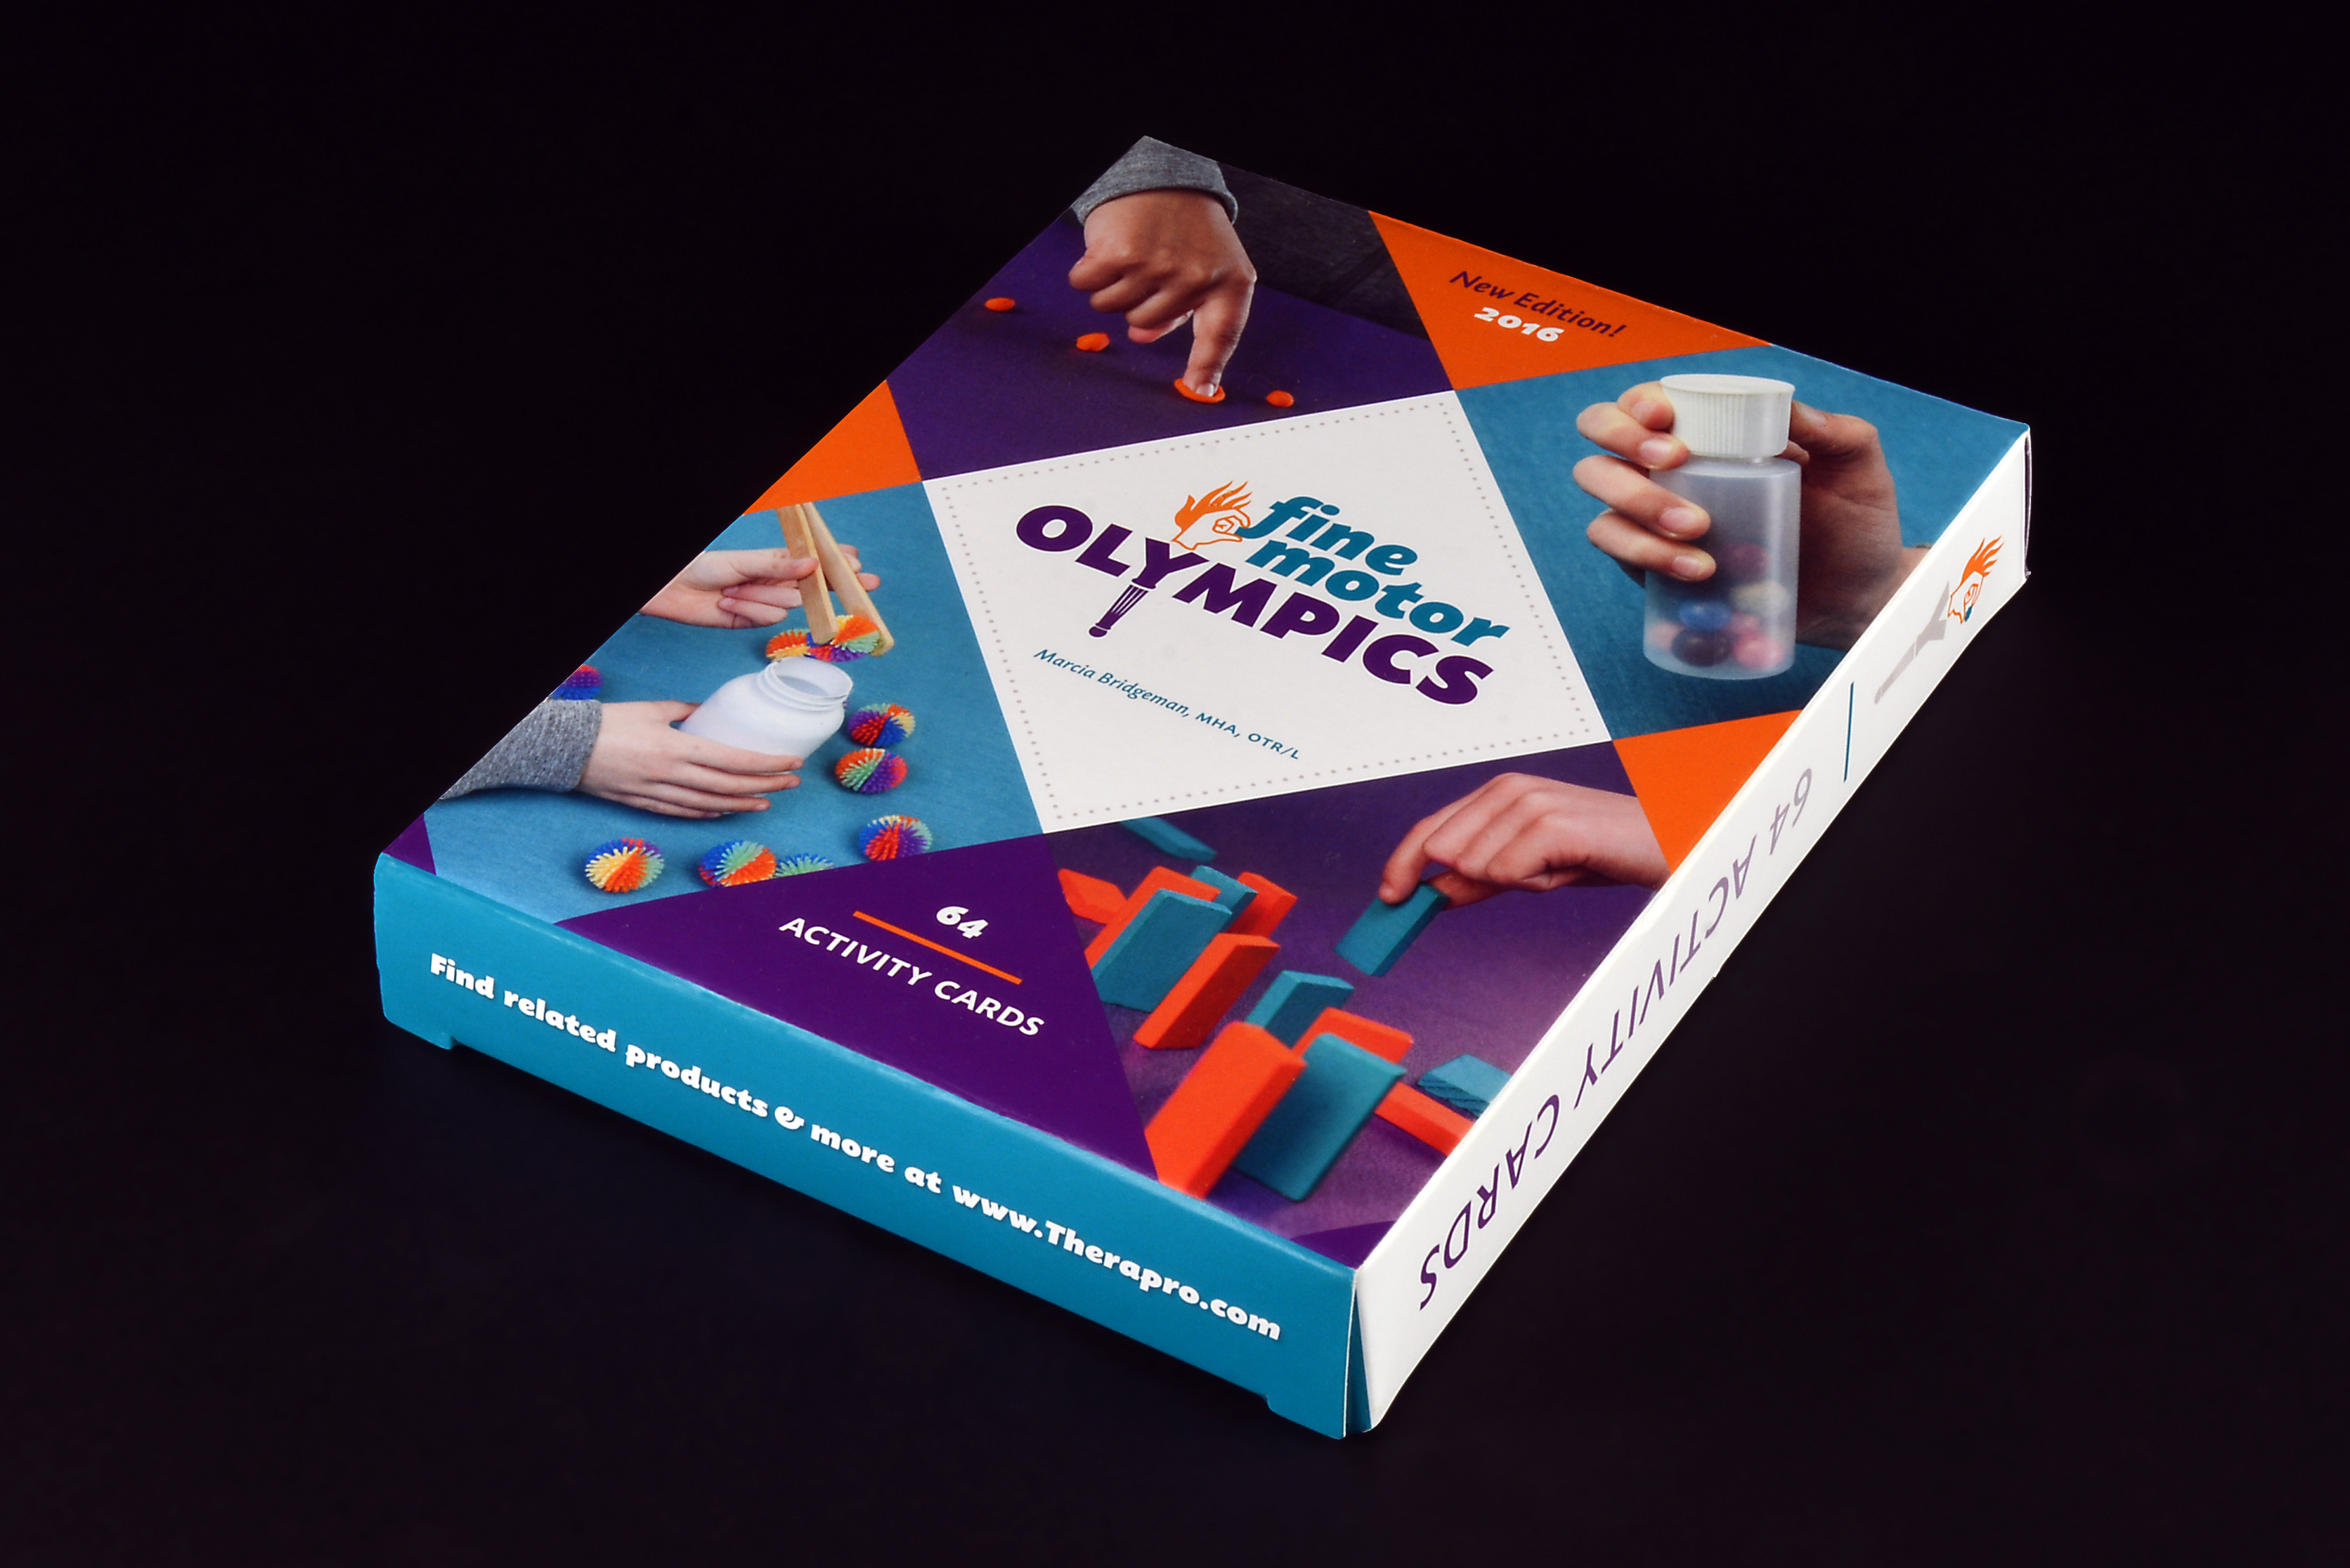 Box design for Fine Motor Olympics, an educational product designed by Milk Row